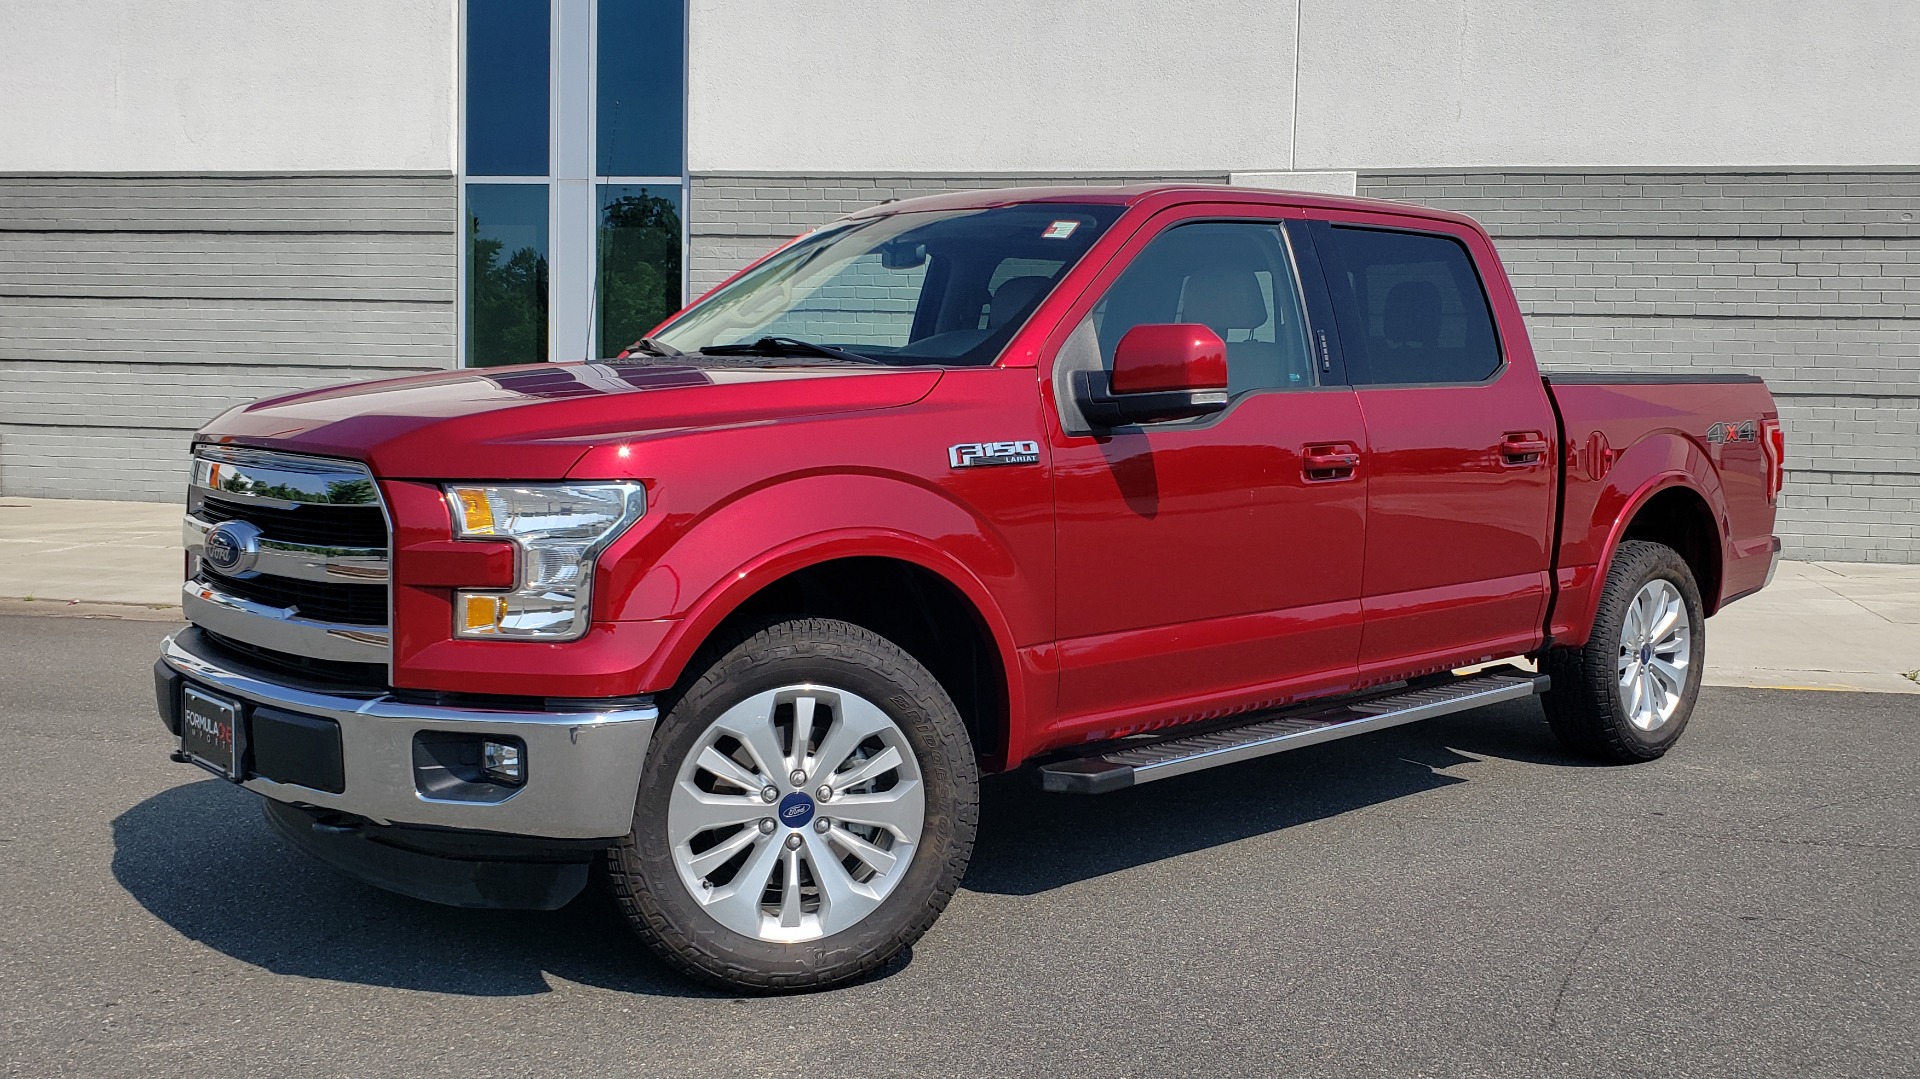 Used 2015 Ford F-150 LARIAT 4X4 SUPERCREW / 5.0L V8 / AUTO / NAV / SUNROOF / REARVIEW for sale Sold at Formula Imports in Charlotte NC 28227 1